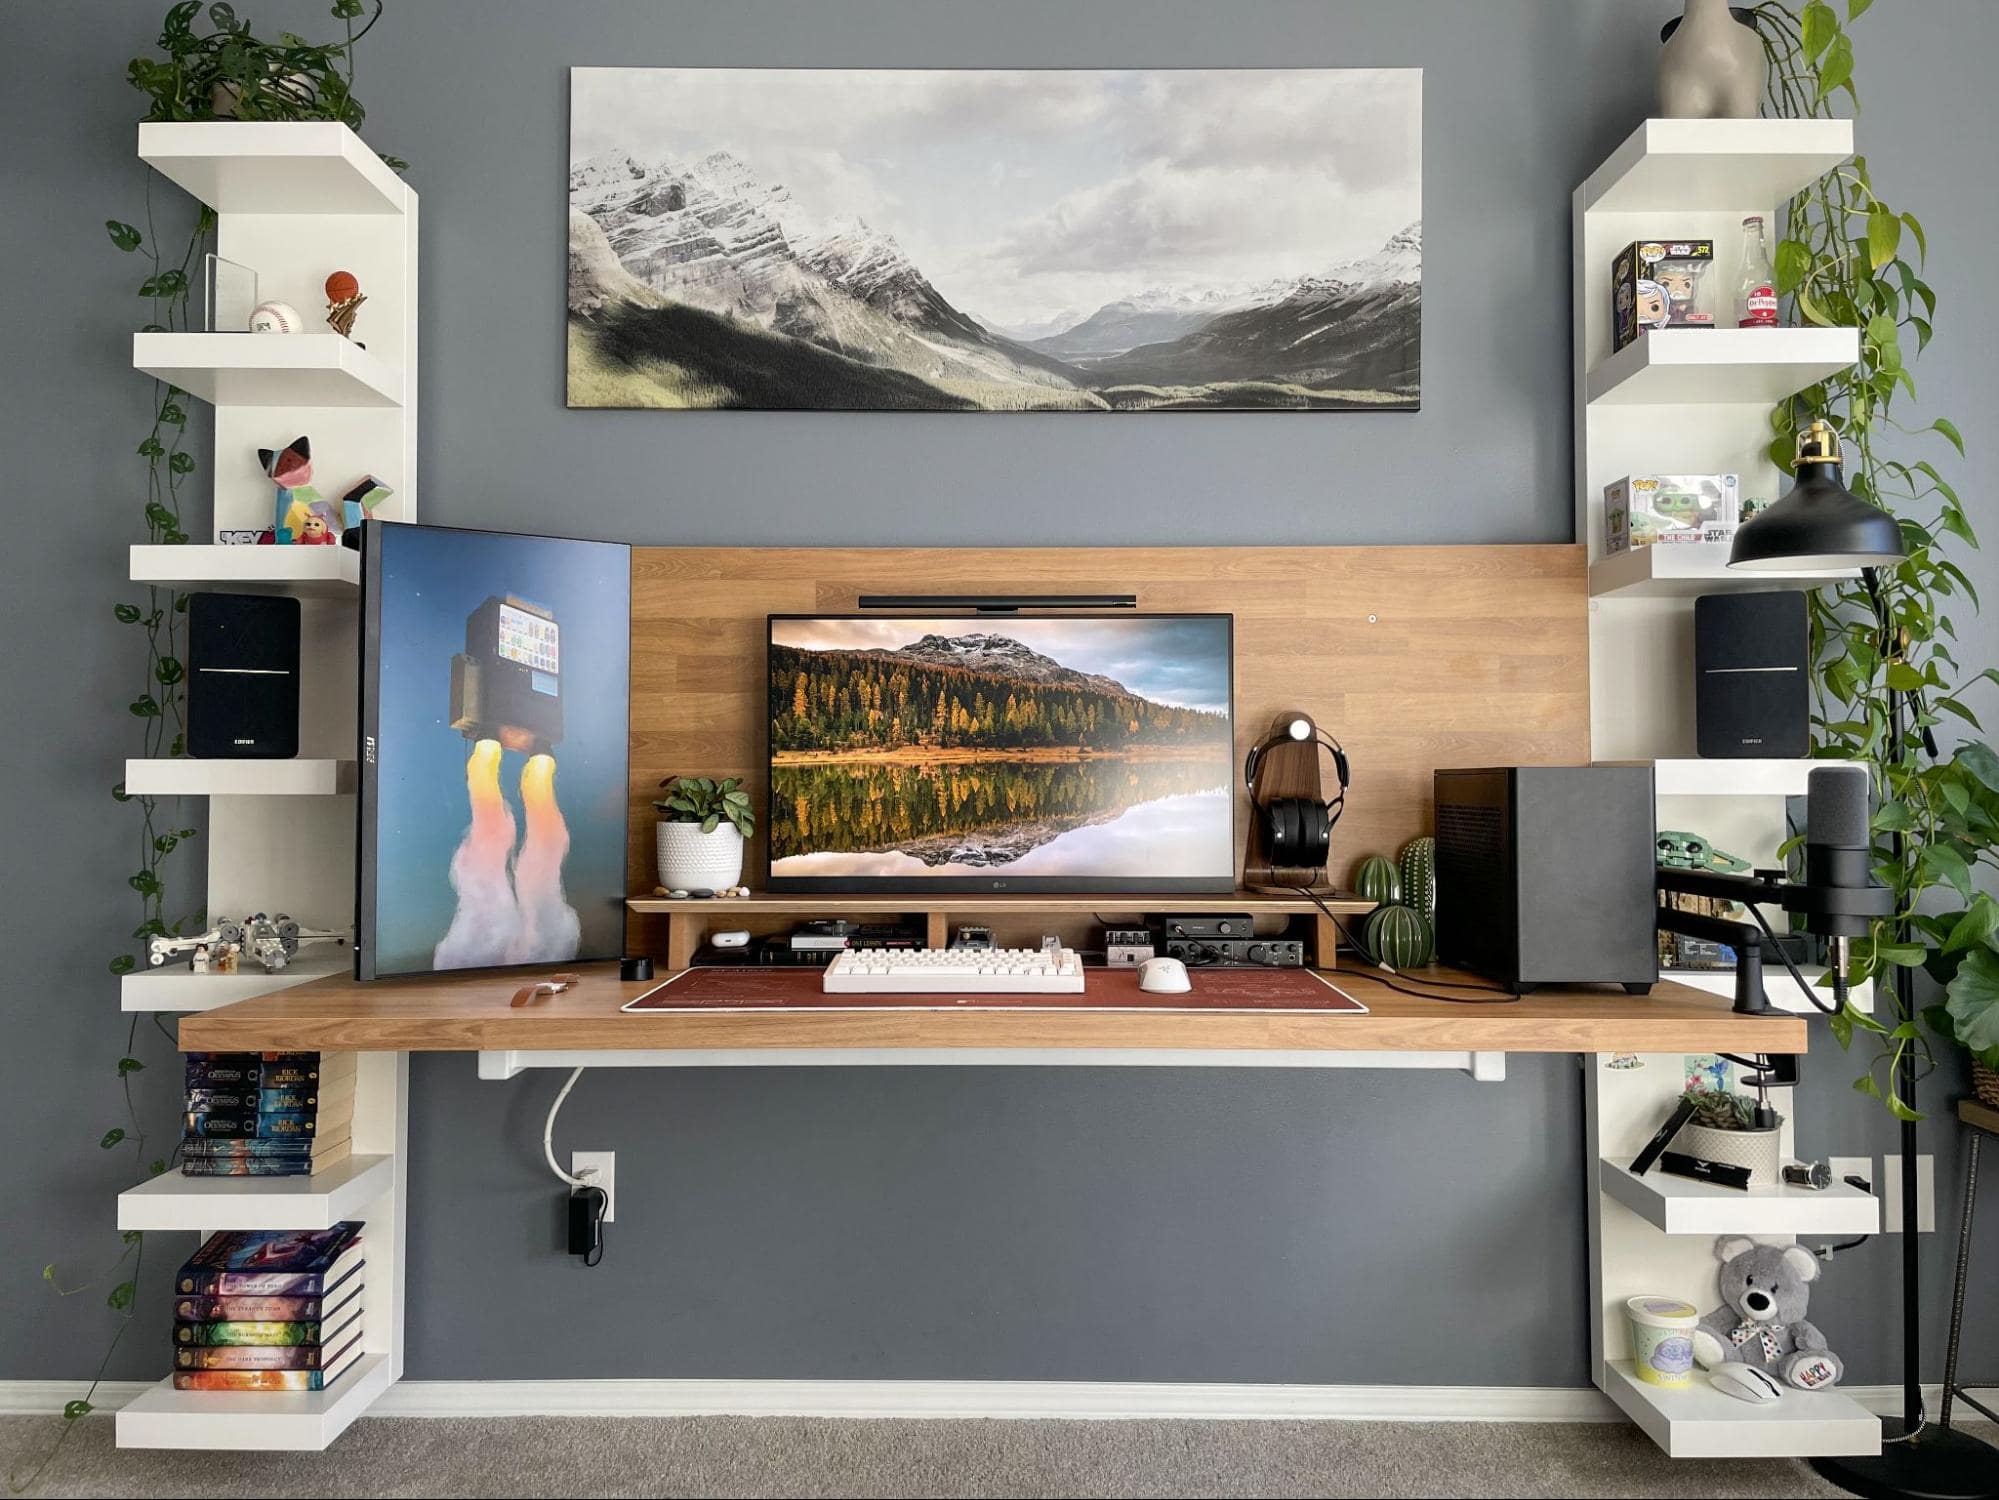 A contemporary home office setup with a floating wooden desk flanked by white shelves filled with books and decor, two monitors, and framed artwork against a grey wall, complemented by indoor plants